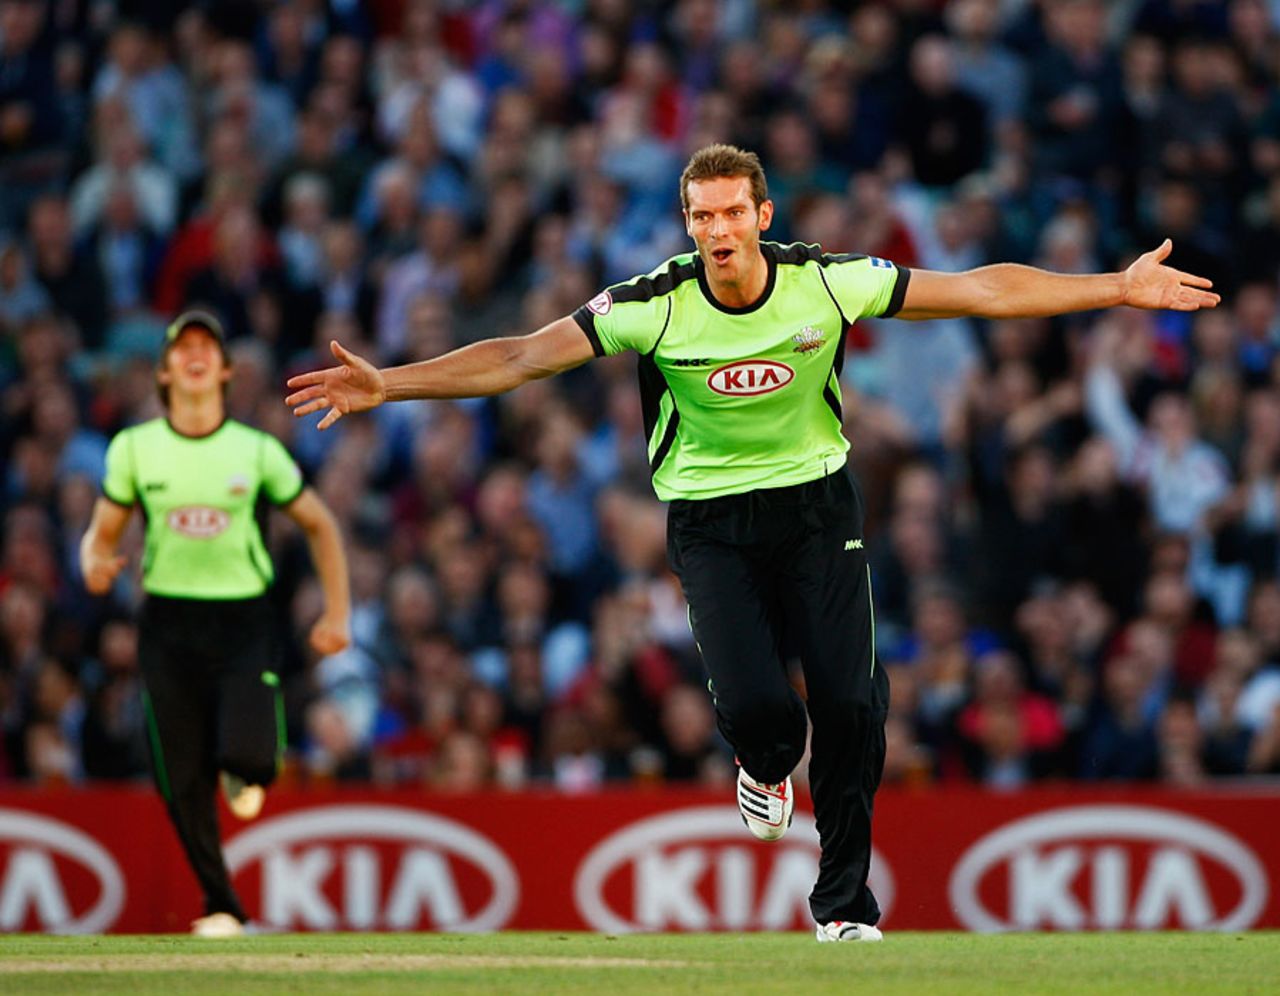 Chris Tremlett celebrates another wicket during his 4 for 16, Surrey v Hampshire, Friends Life t20, The Oval, July 8, 2011